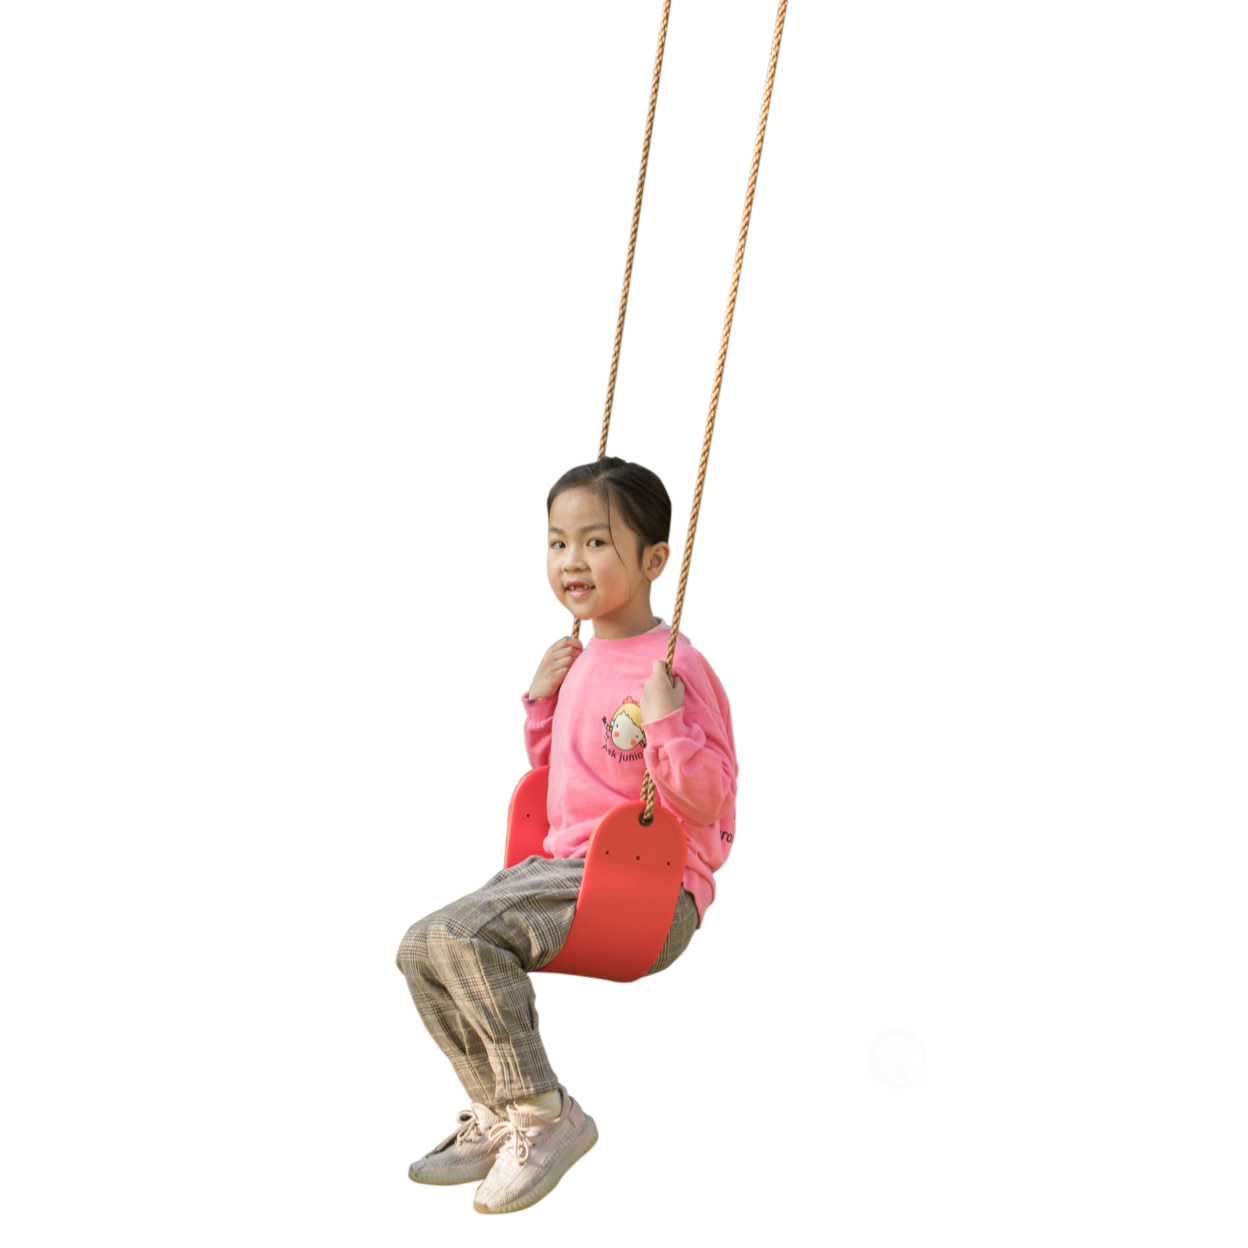 Outdoor Playground Kids Heavy Duty Swing Seat, EVA Belt Swing With Rope For All Ages - Set Of 2